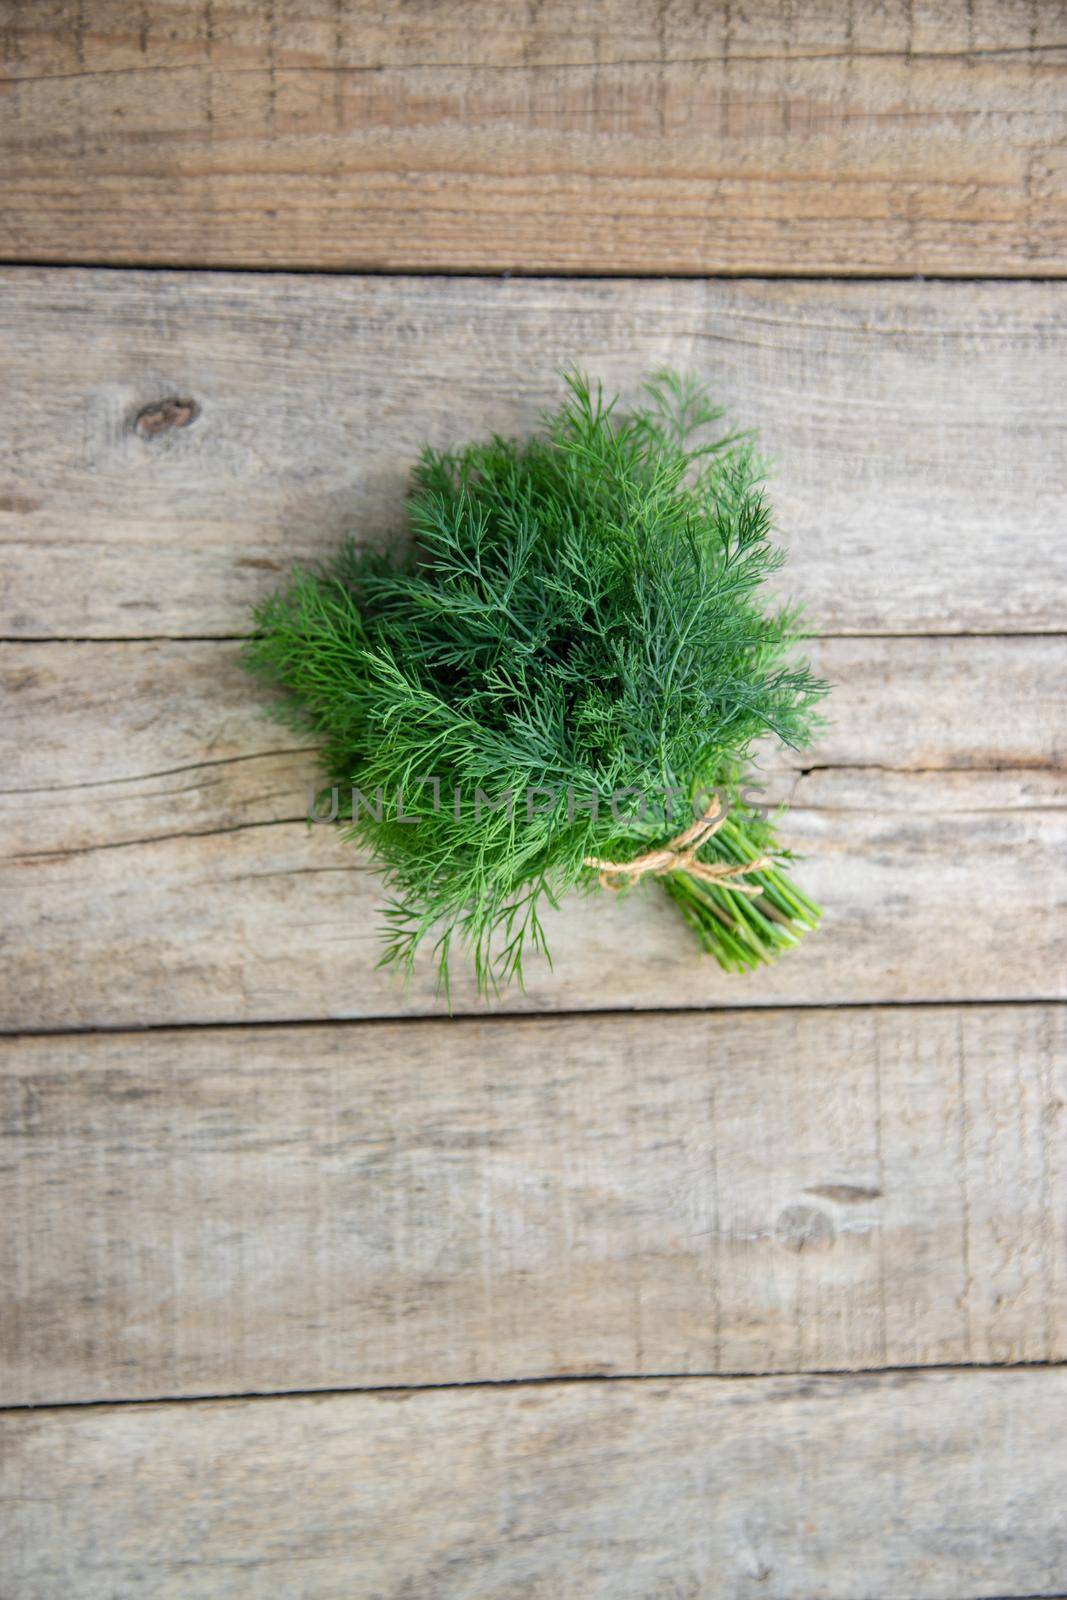 fresh home herbs from the garden. Dill. Selective focus. by mila1784